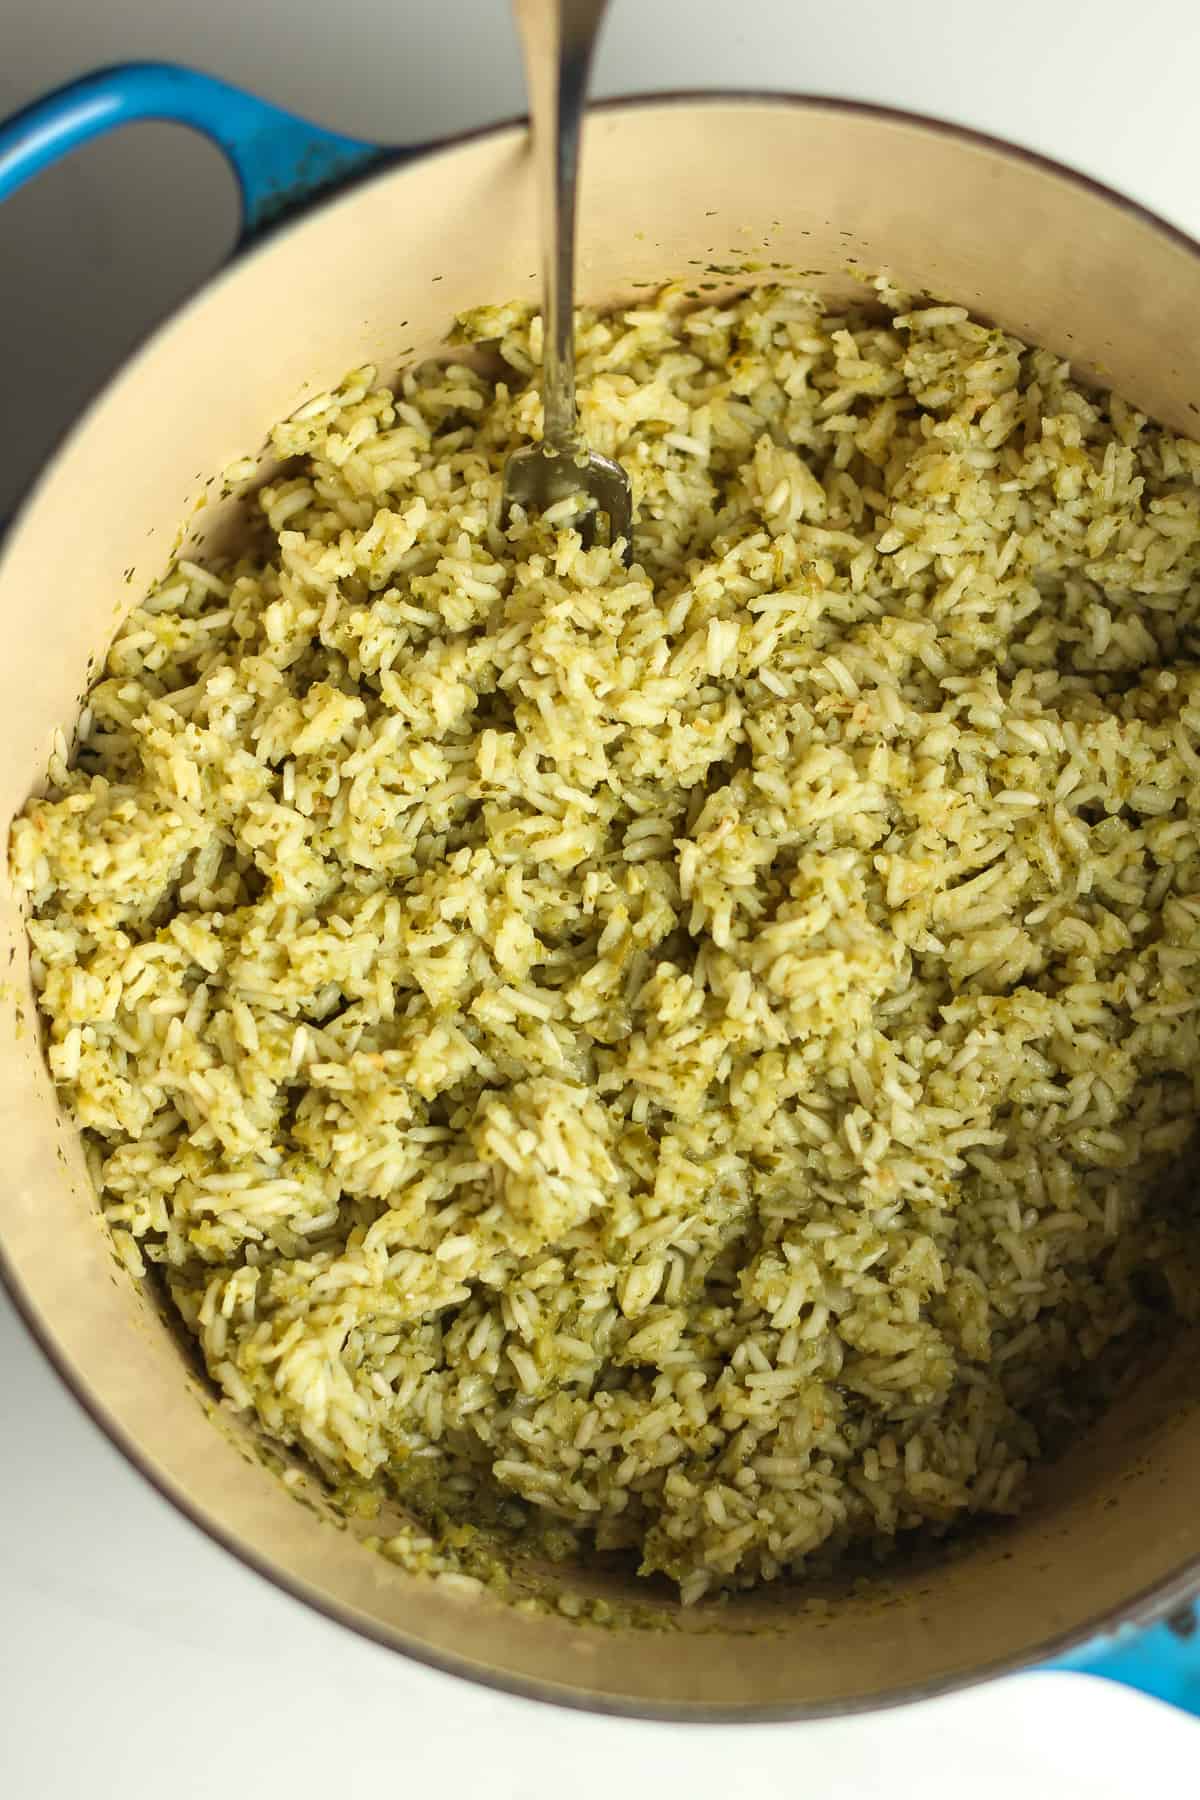 A stock pot of green Chile rice with a fork.